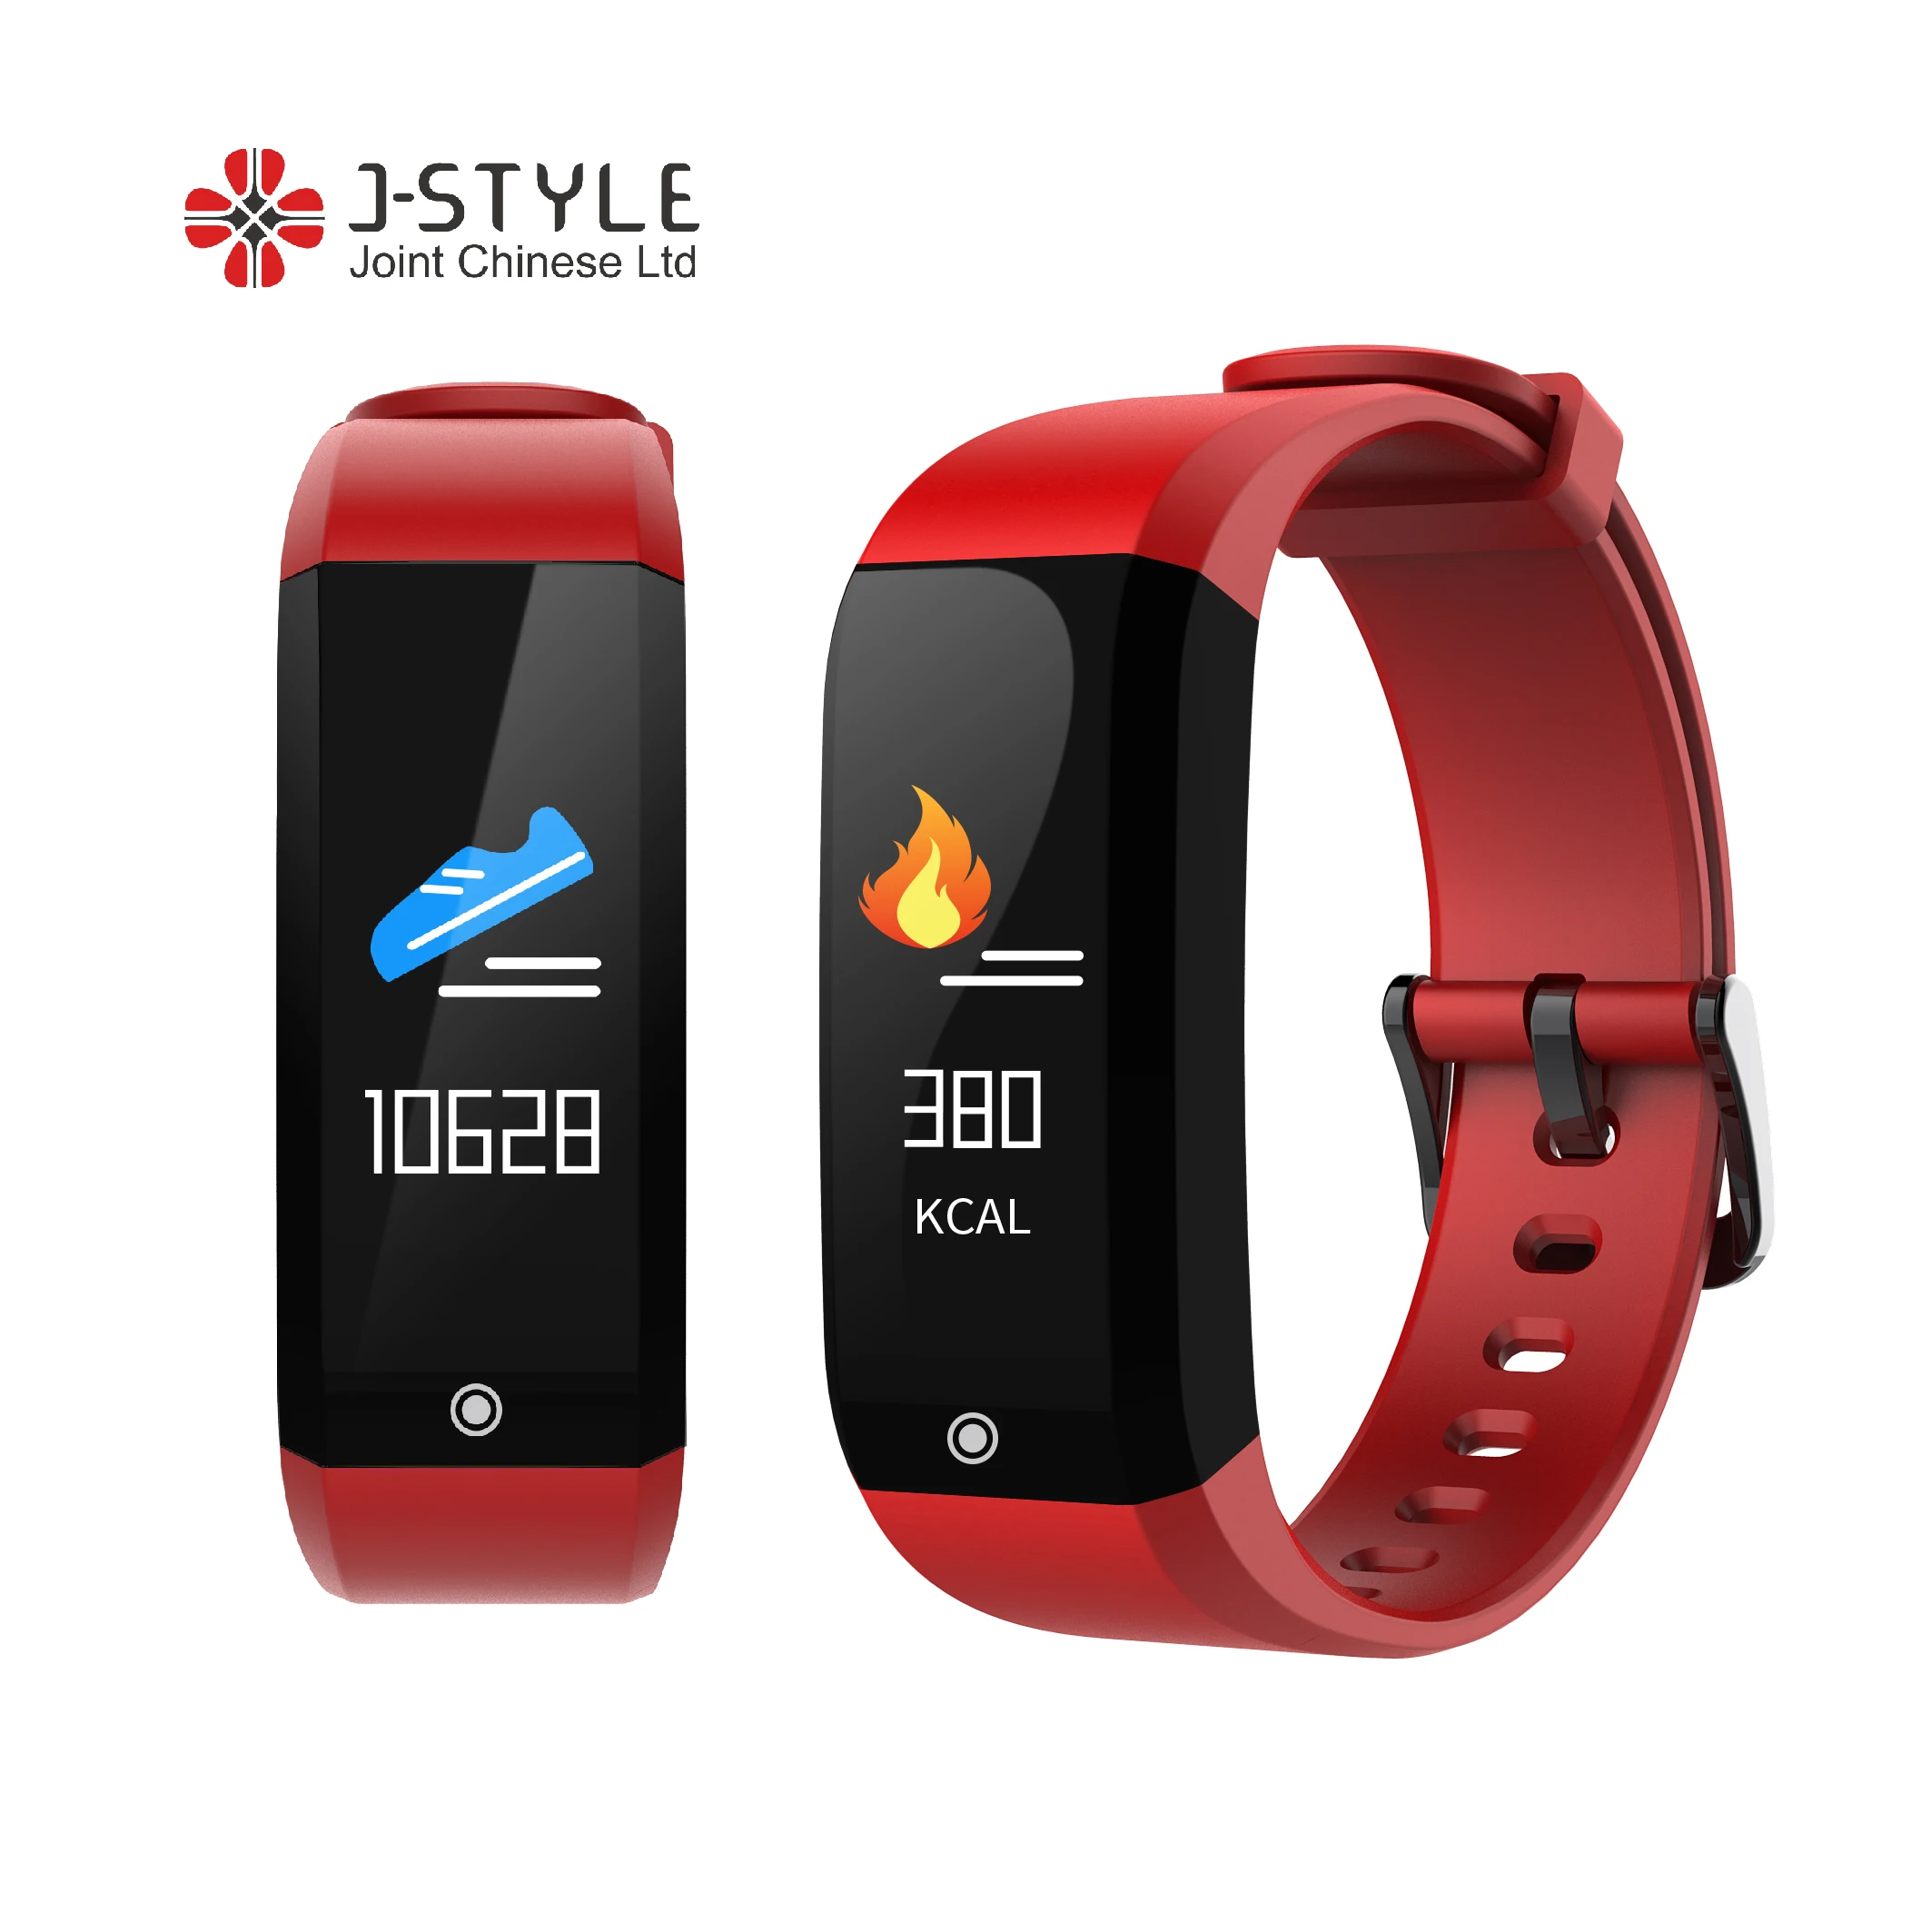 

J-Style 1810 Android iOS Application Supported Dynamic Heart Rate Fitness Tracker Smart Watch with Color Display, Black, red, slate, or oem color